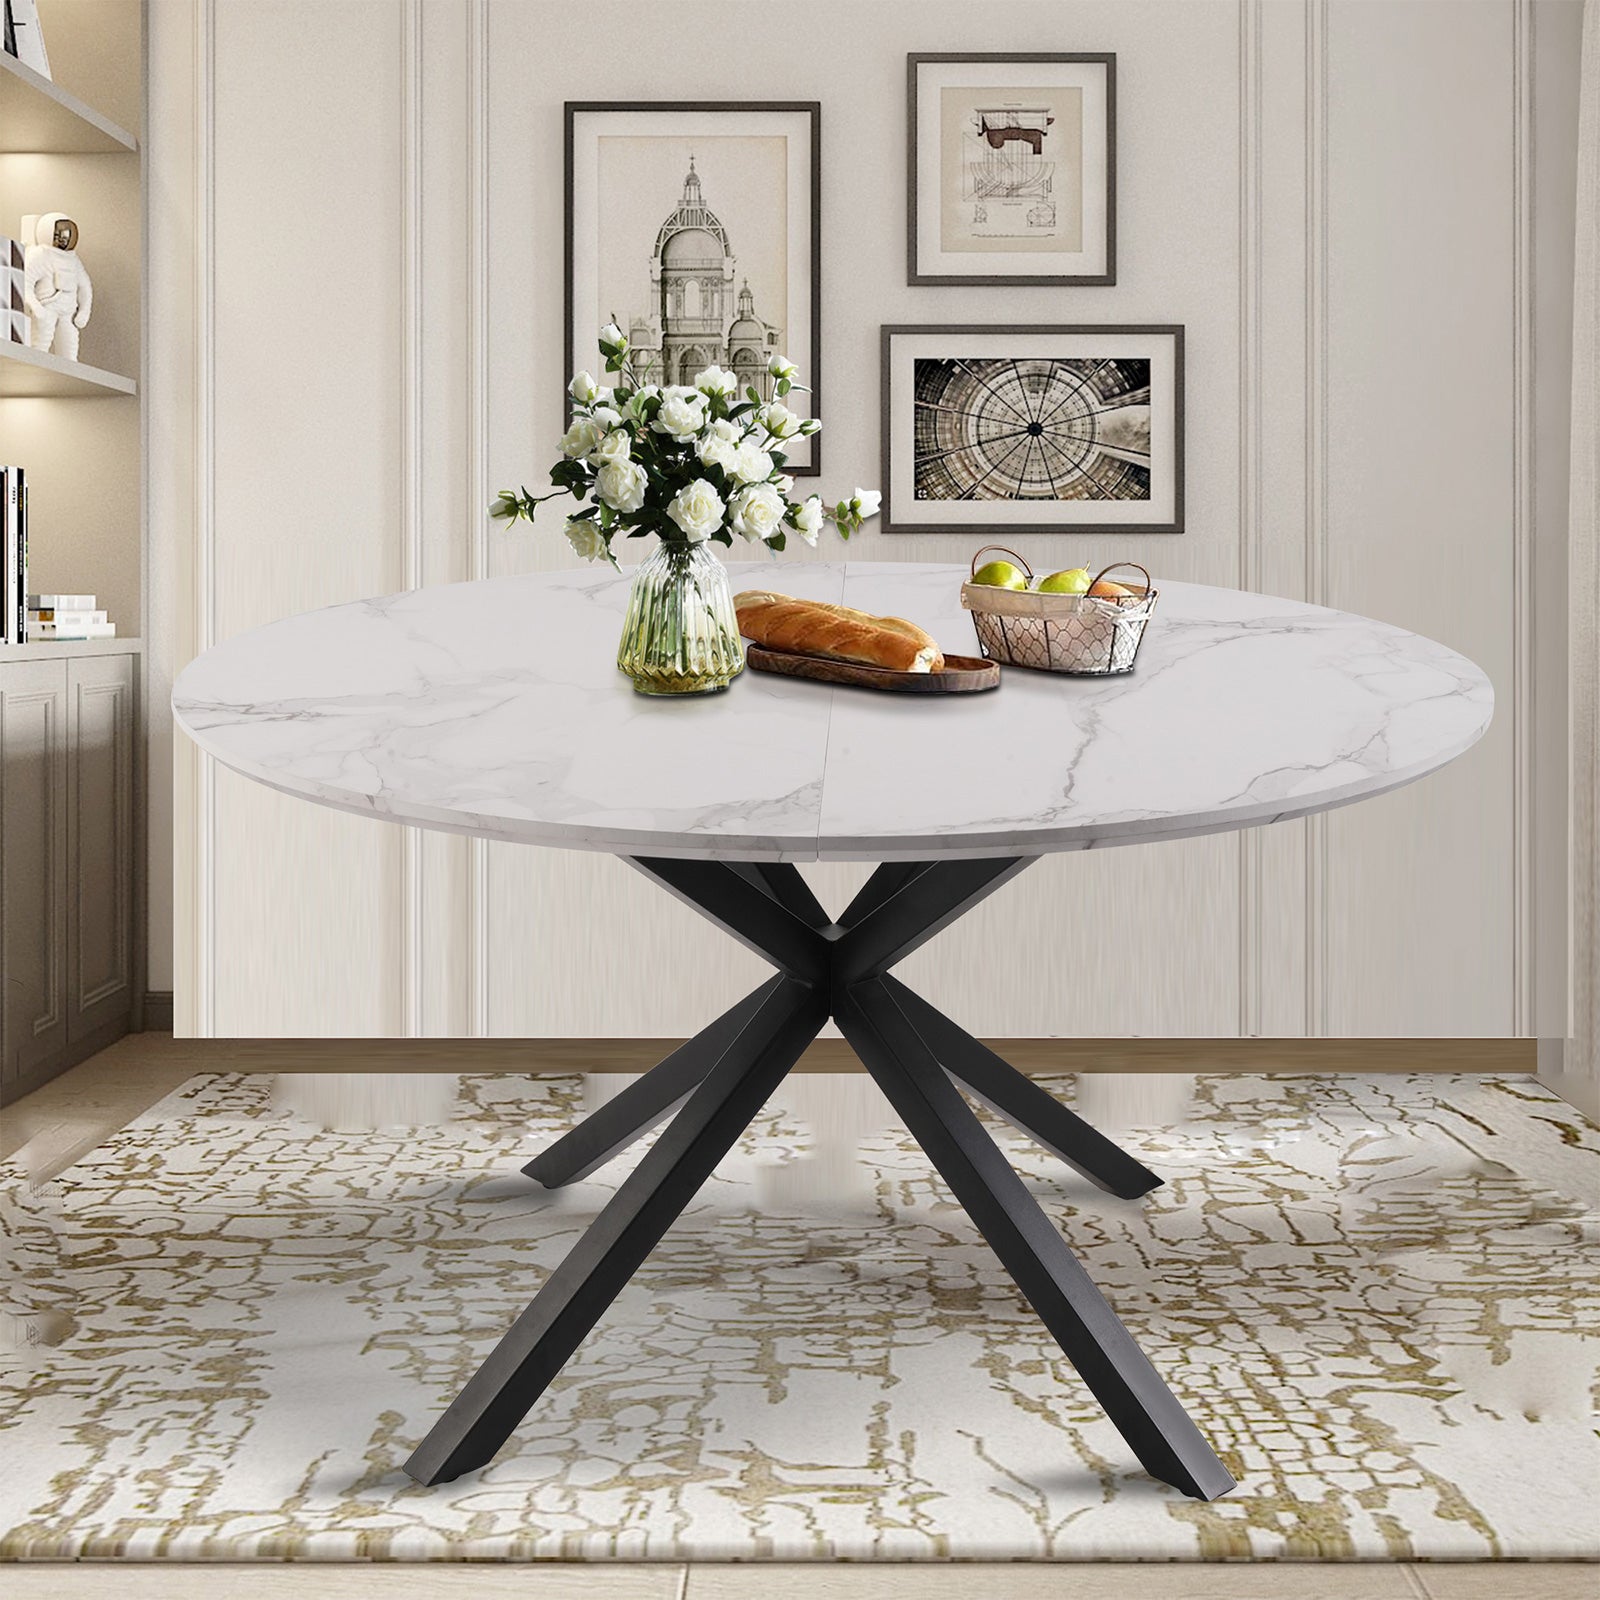 53" Mid-Century Modern Round Dining Table for 4-6 Person W/Solid Metal Legs, Marble Texture